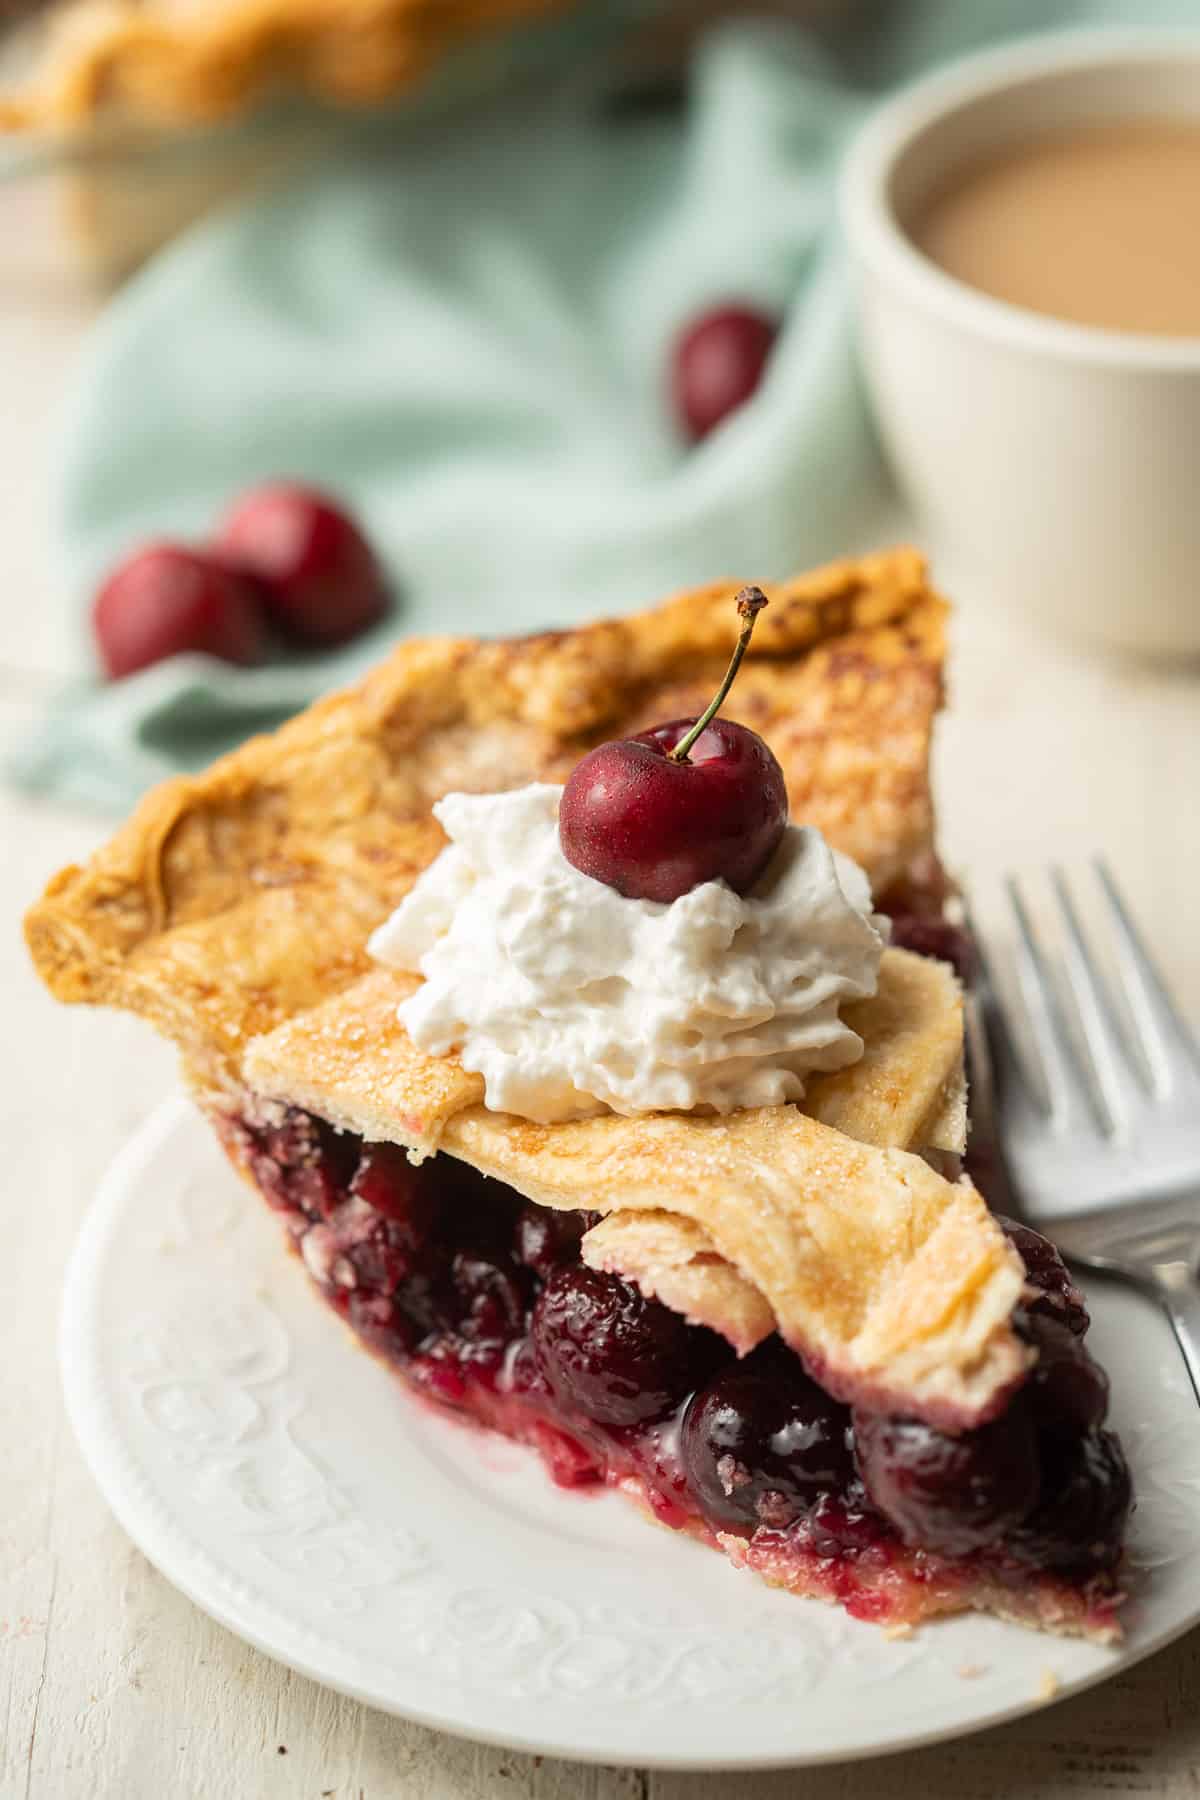 Slice of Vegan Cherry Pie on a plate with coffee cup and napkin in the background.